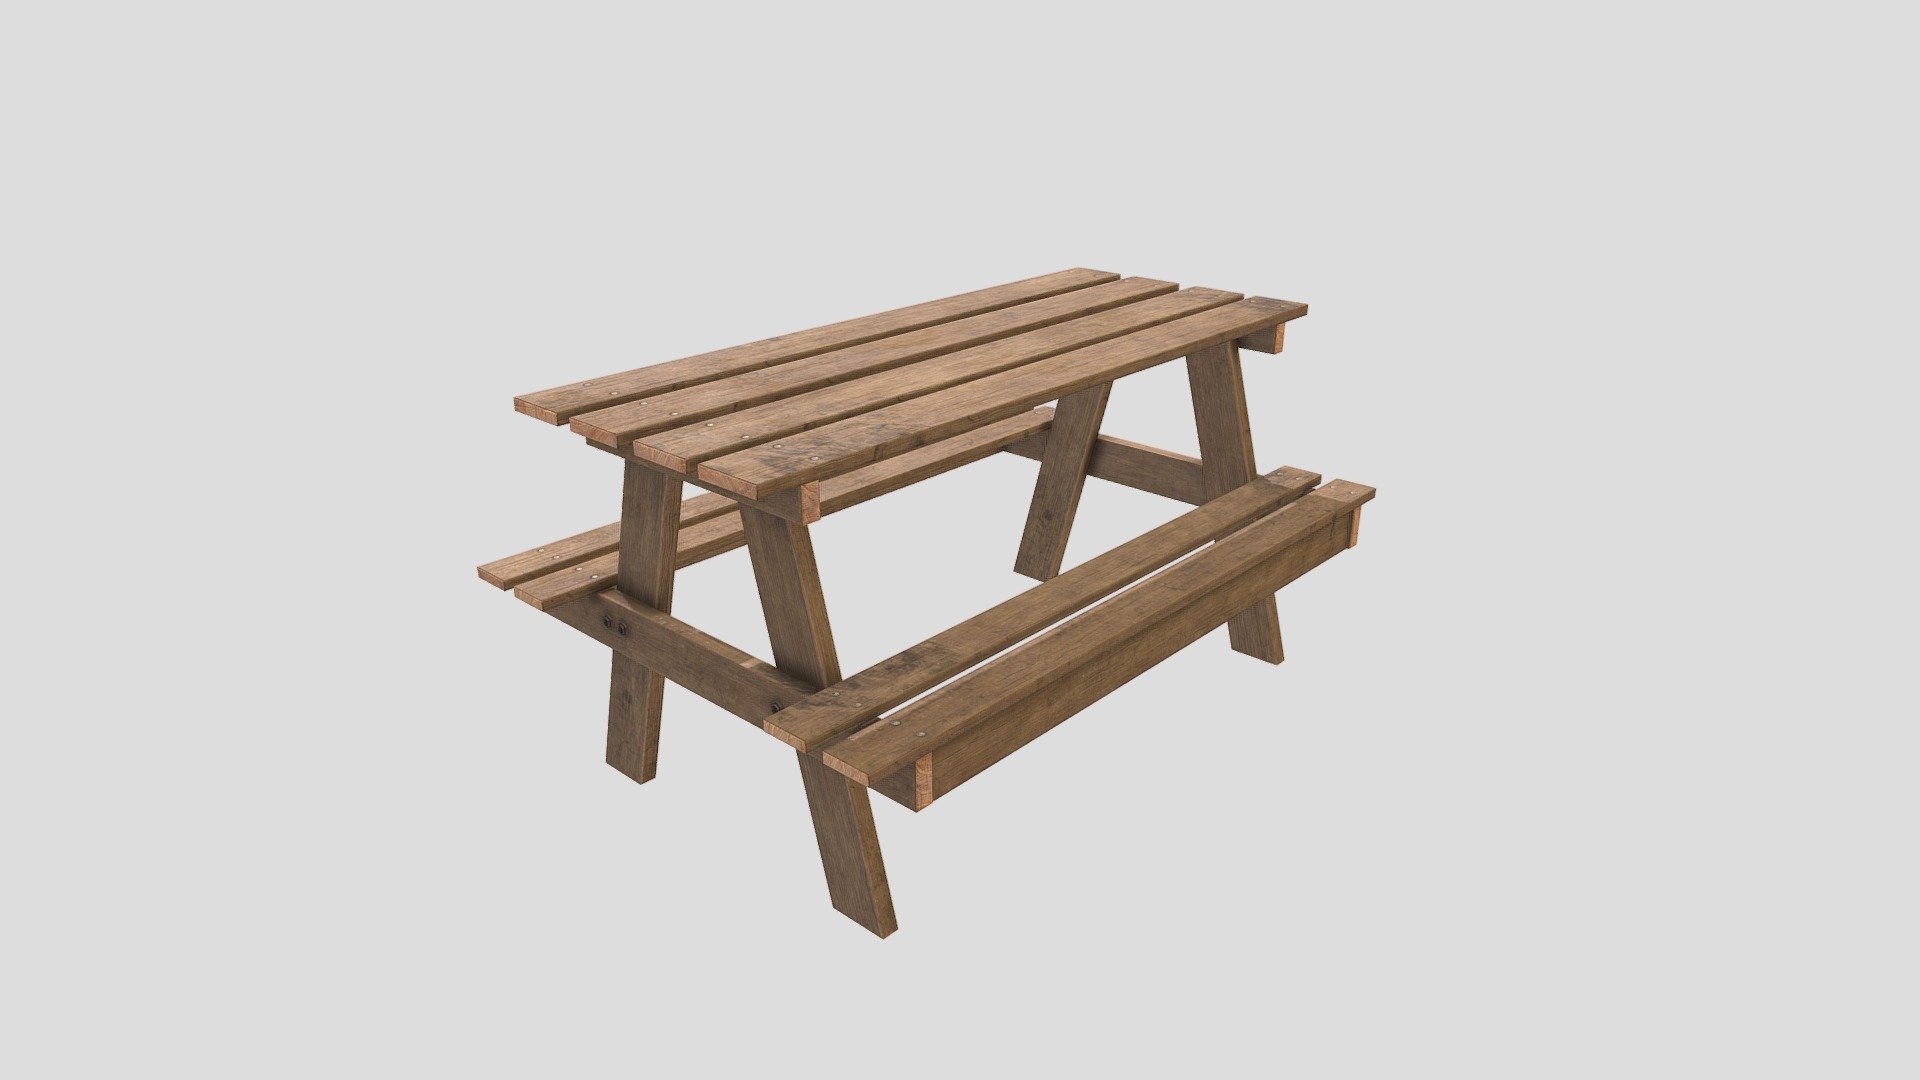 Park Table model. 
Game-ready. Low-poly with PBR materials ( Albedo, Metallic+Roughness+AO, Normal map)
Email: yrayushka@yahoo.com
WEB: https://gest.lt/ - Park Table | Game ready - Buy Royalty Free 3D model by Gest.lt (@gestLT) 3d model